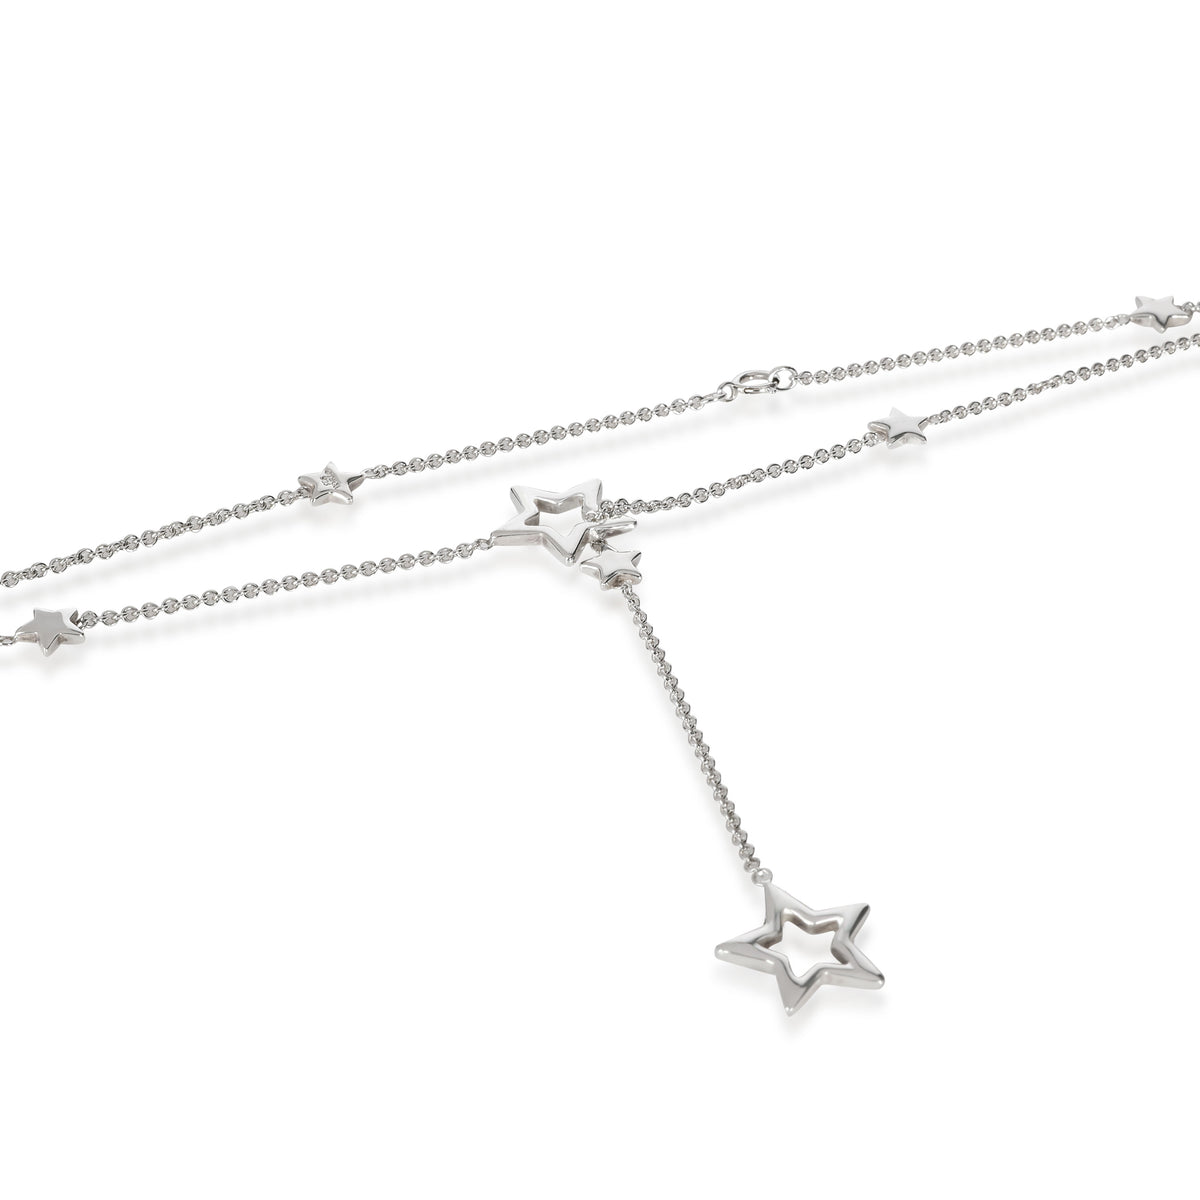 Tiffany & Co. Lariat Star Necklace in  Sterling Silver